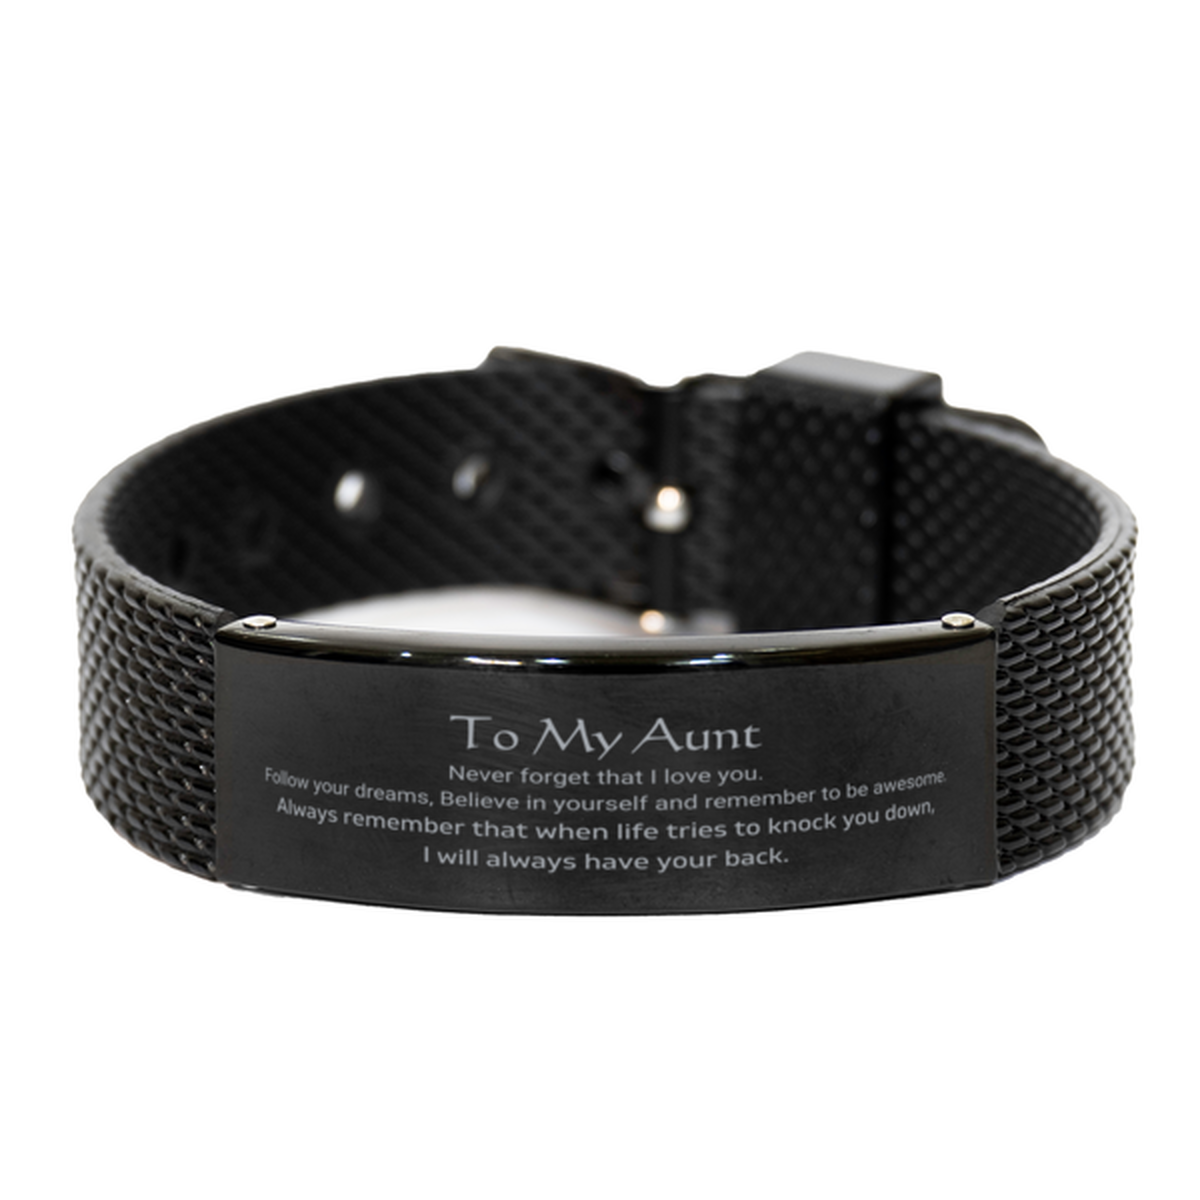 Inspirational Gifts for Aunt, Follow your dreams, Believe in yourself, Aunt Black Shark Mesh Bracelet, Birthday Christmas Unique Gifts For Aunt